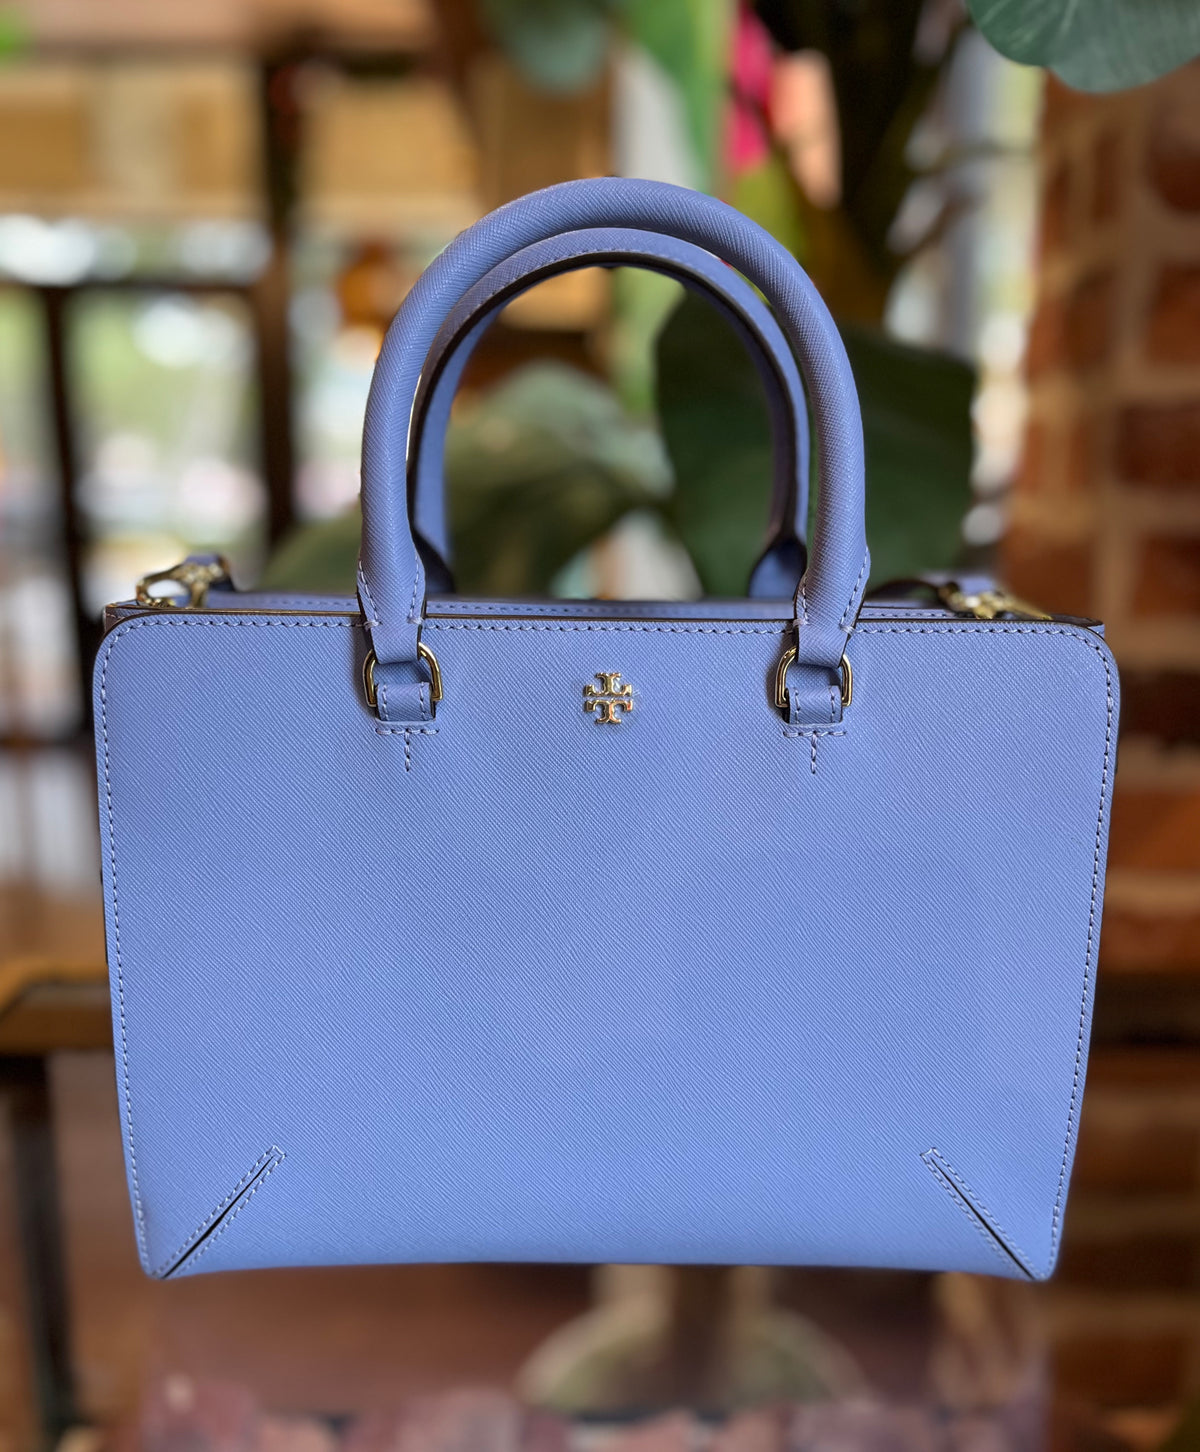 Tory Burch Perwinkle Emerson Double Pocket Tote